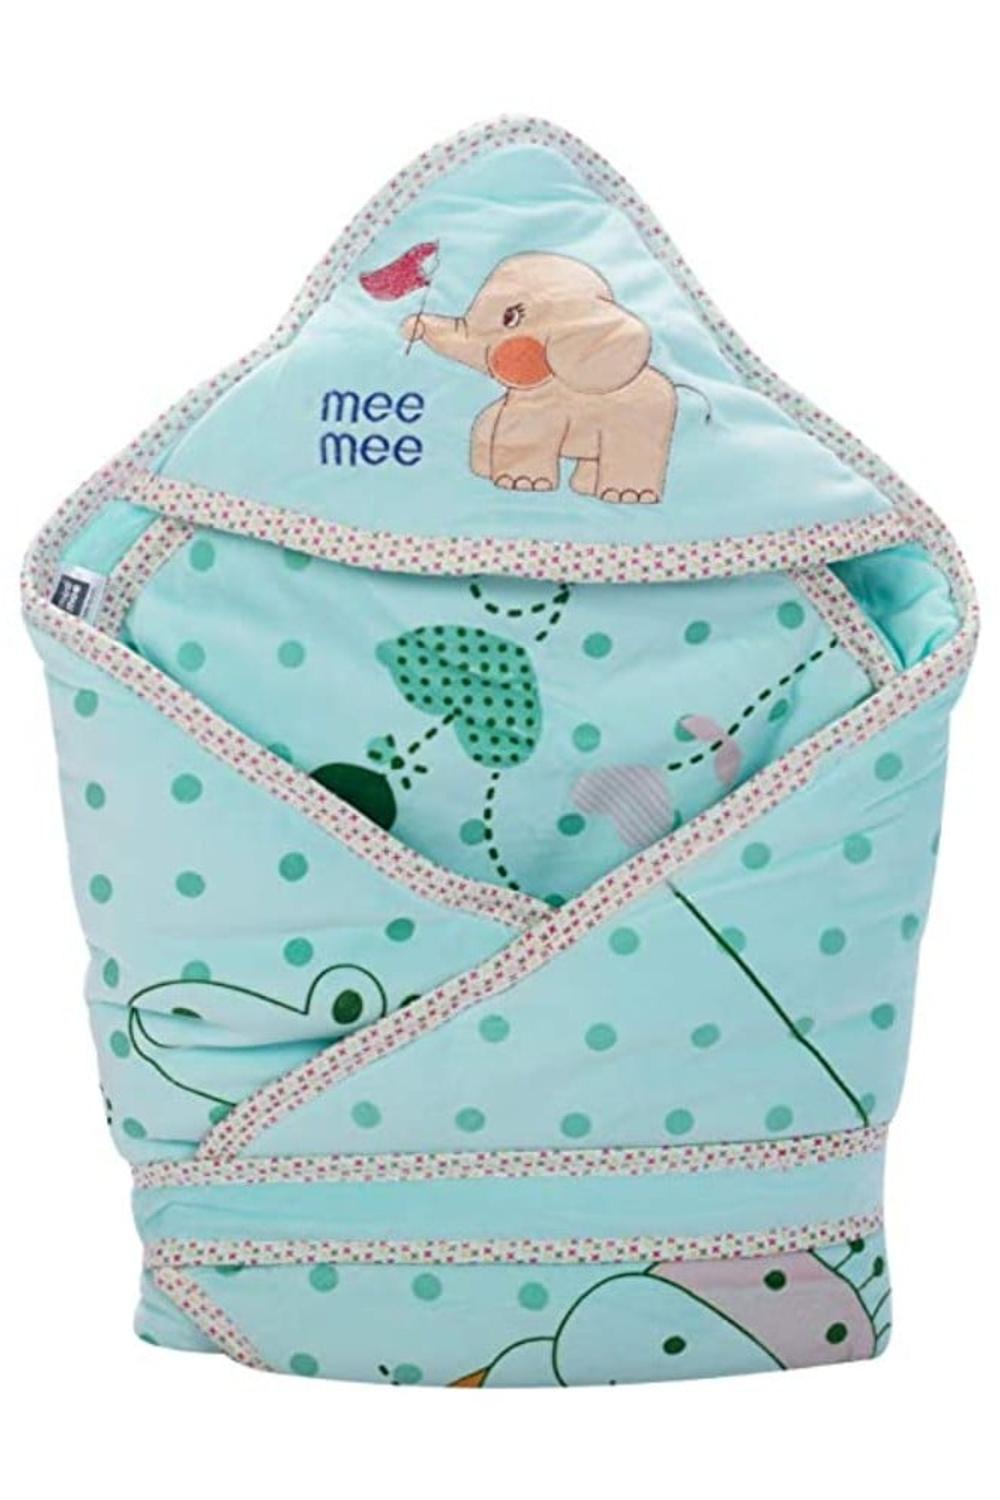 Mee Mee Baby Wrapper with Hood (Green)